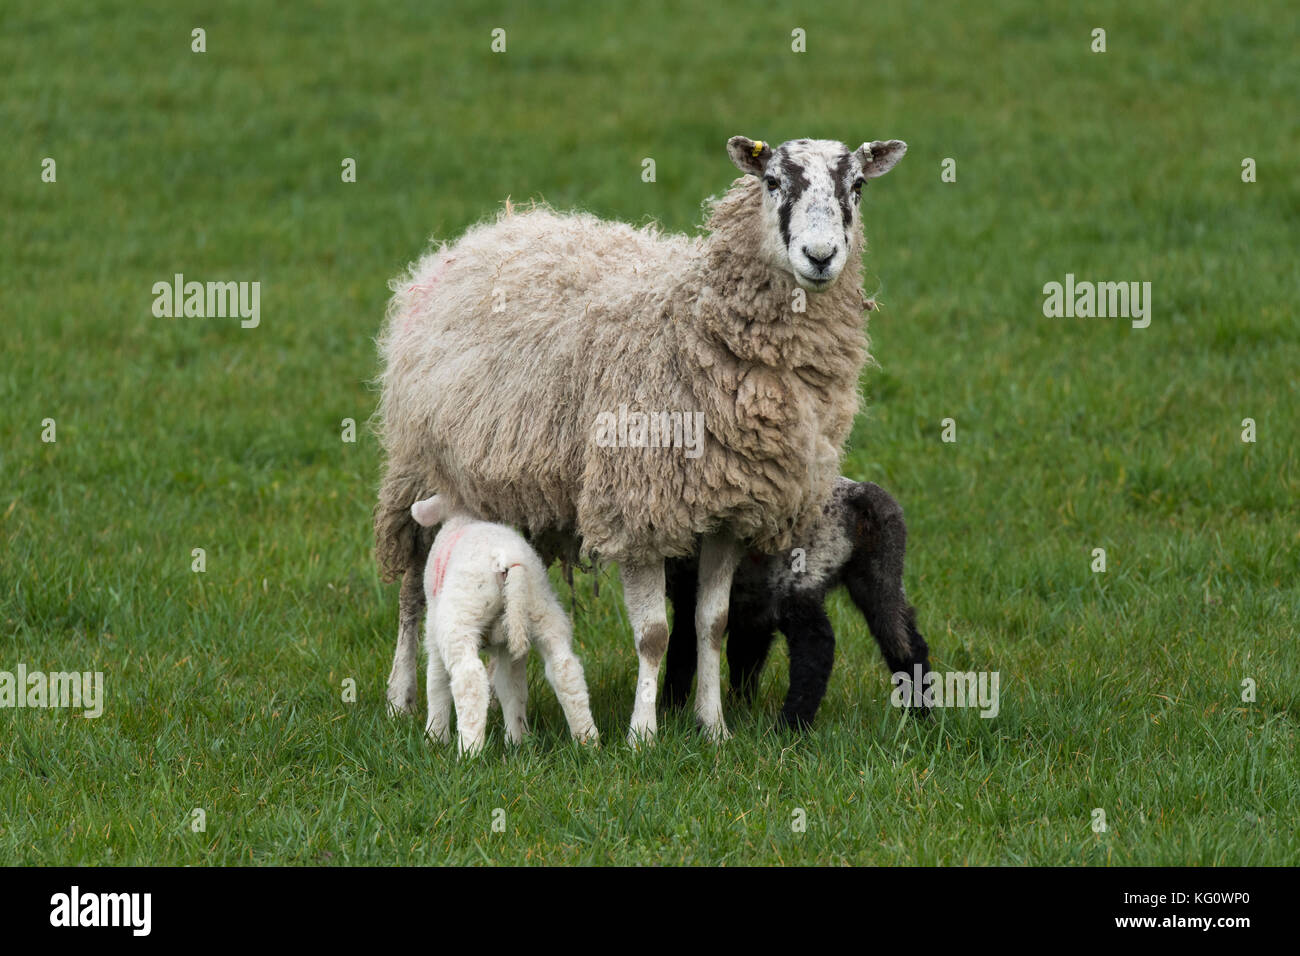 Close-up of 1 sheep (ewe) & 2 tiny lambs standing on grass in farm field in spring (youngsters feeding & mother staring at camera) - England, GB, UK. Stock Photo